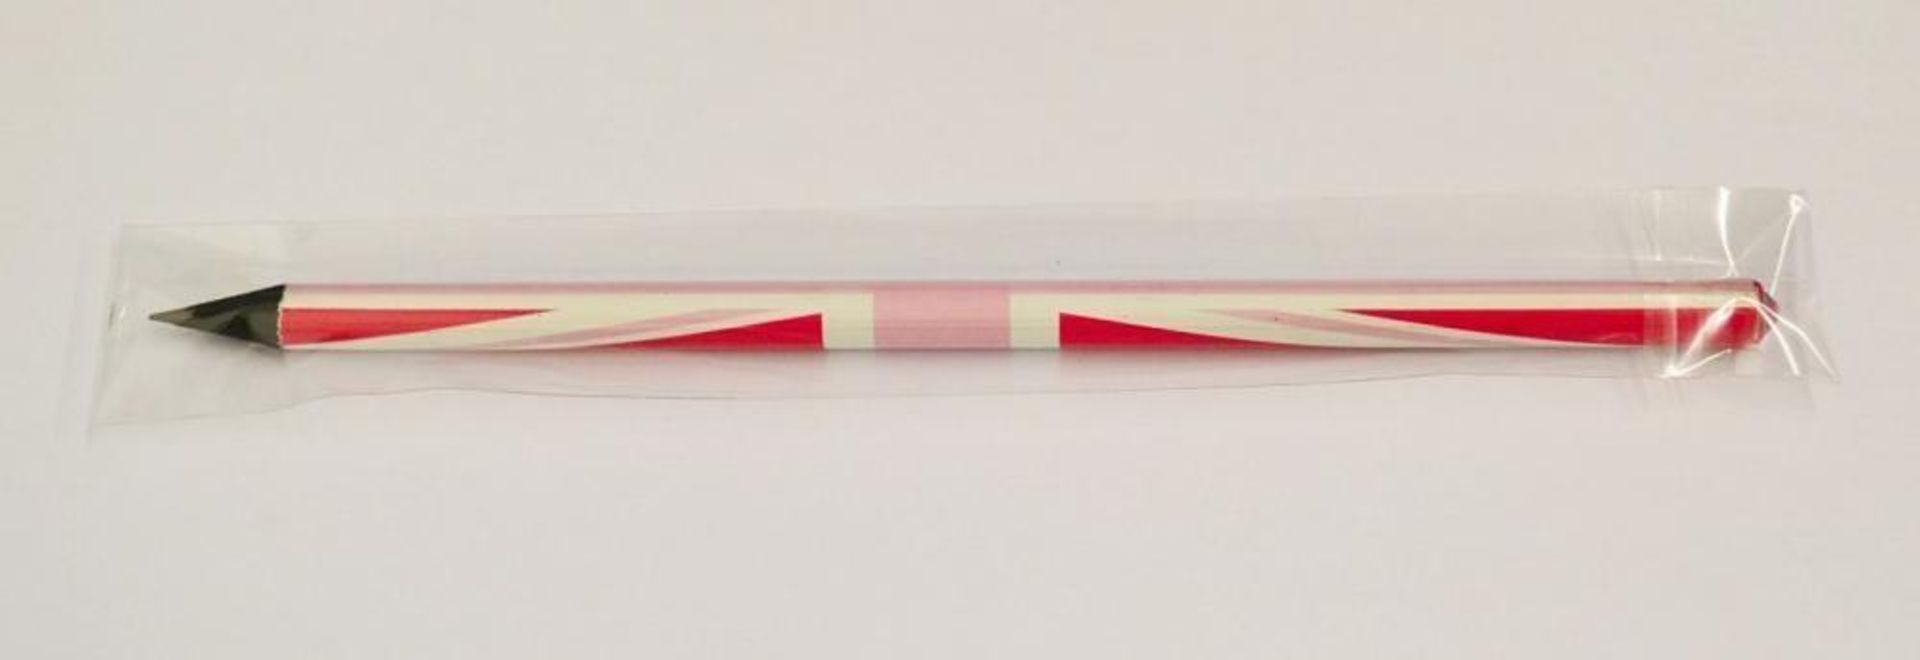 140 x ICE London "Union Jack" Pencils - Made With SWAROVSKI® ELEMENTS - Colour: PINK - New / - Image 2 of 2